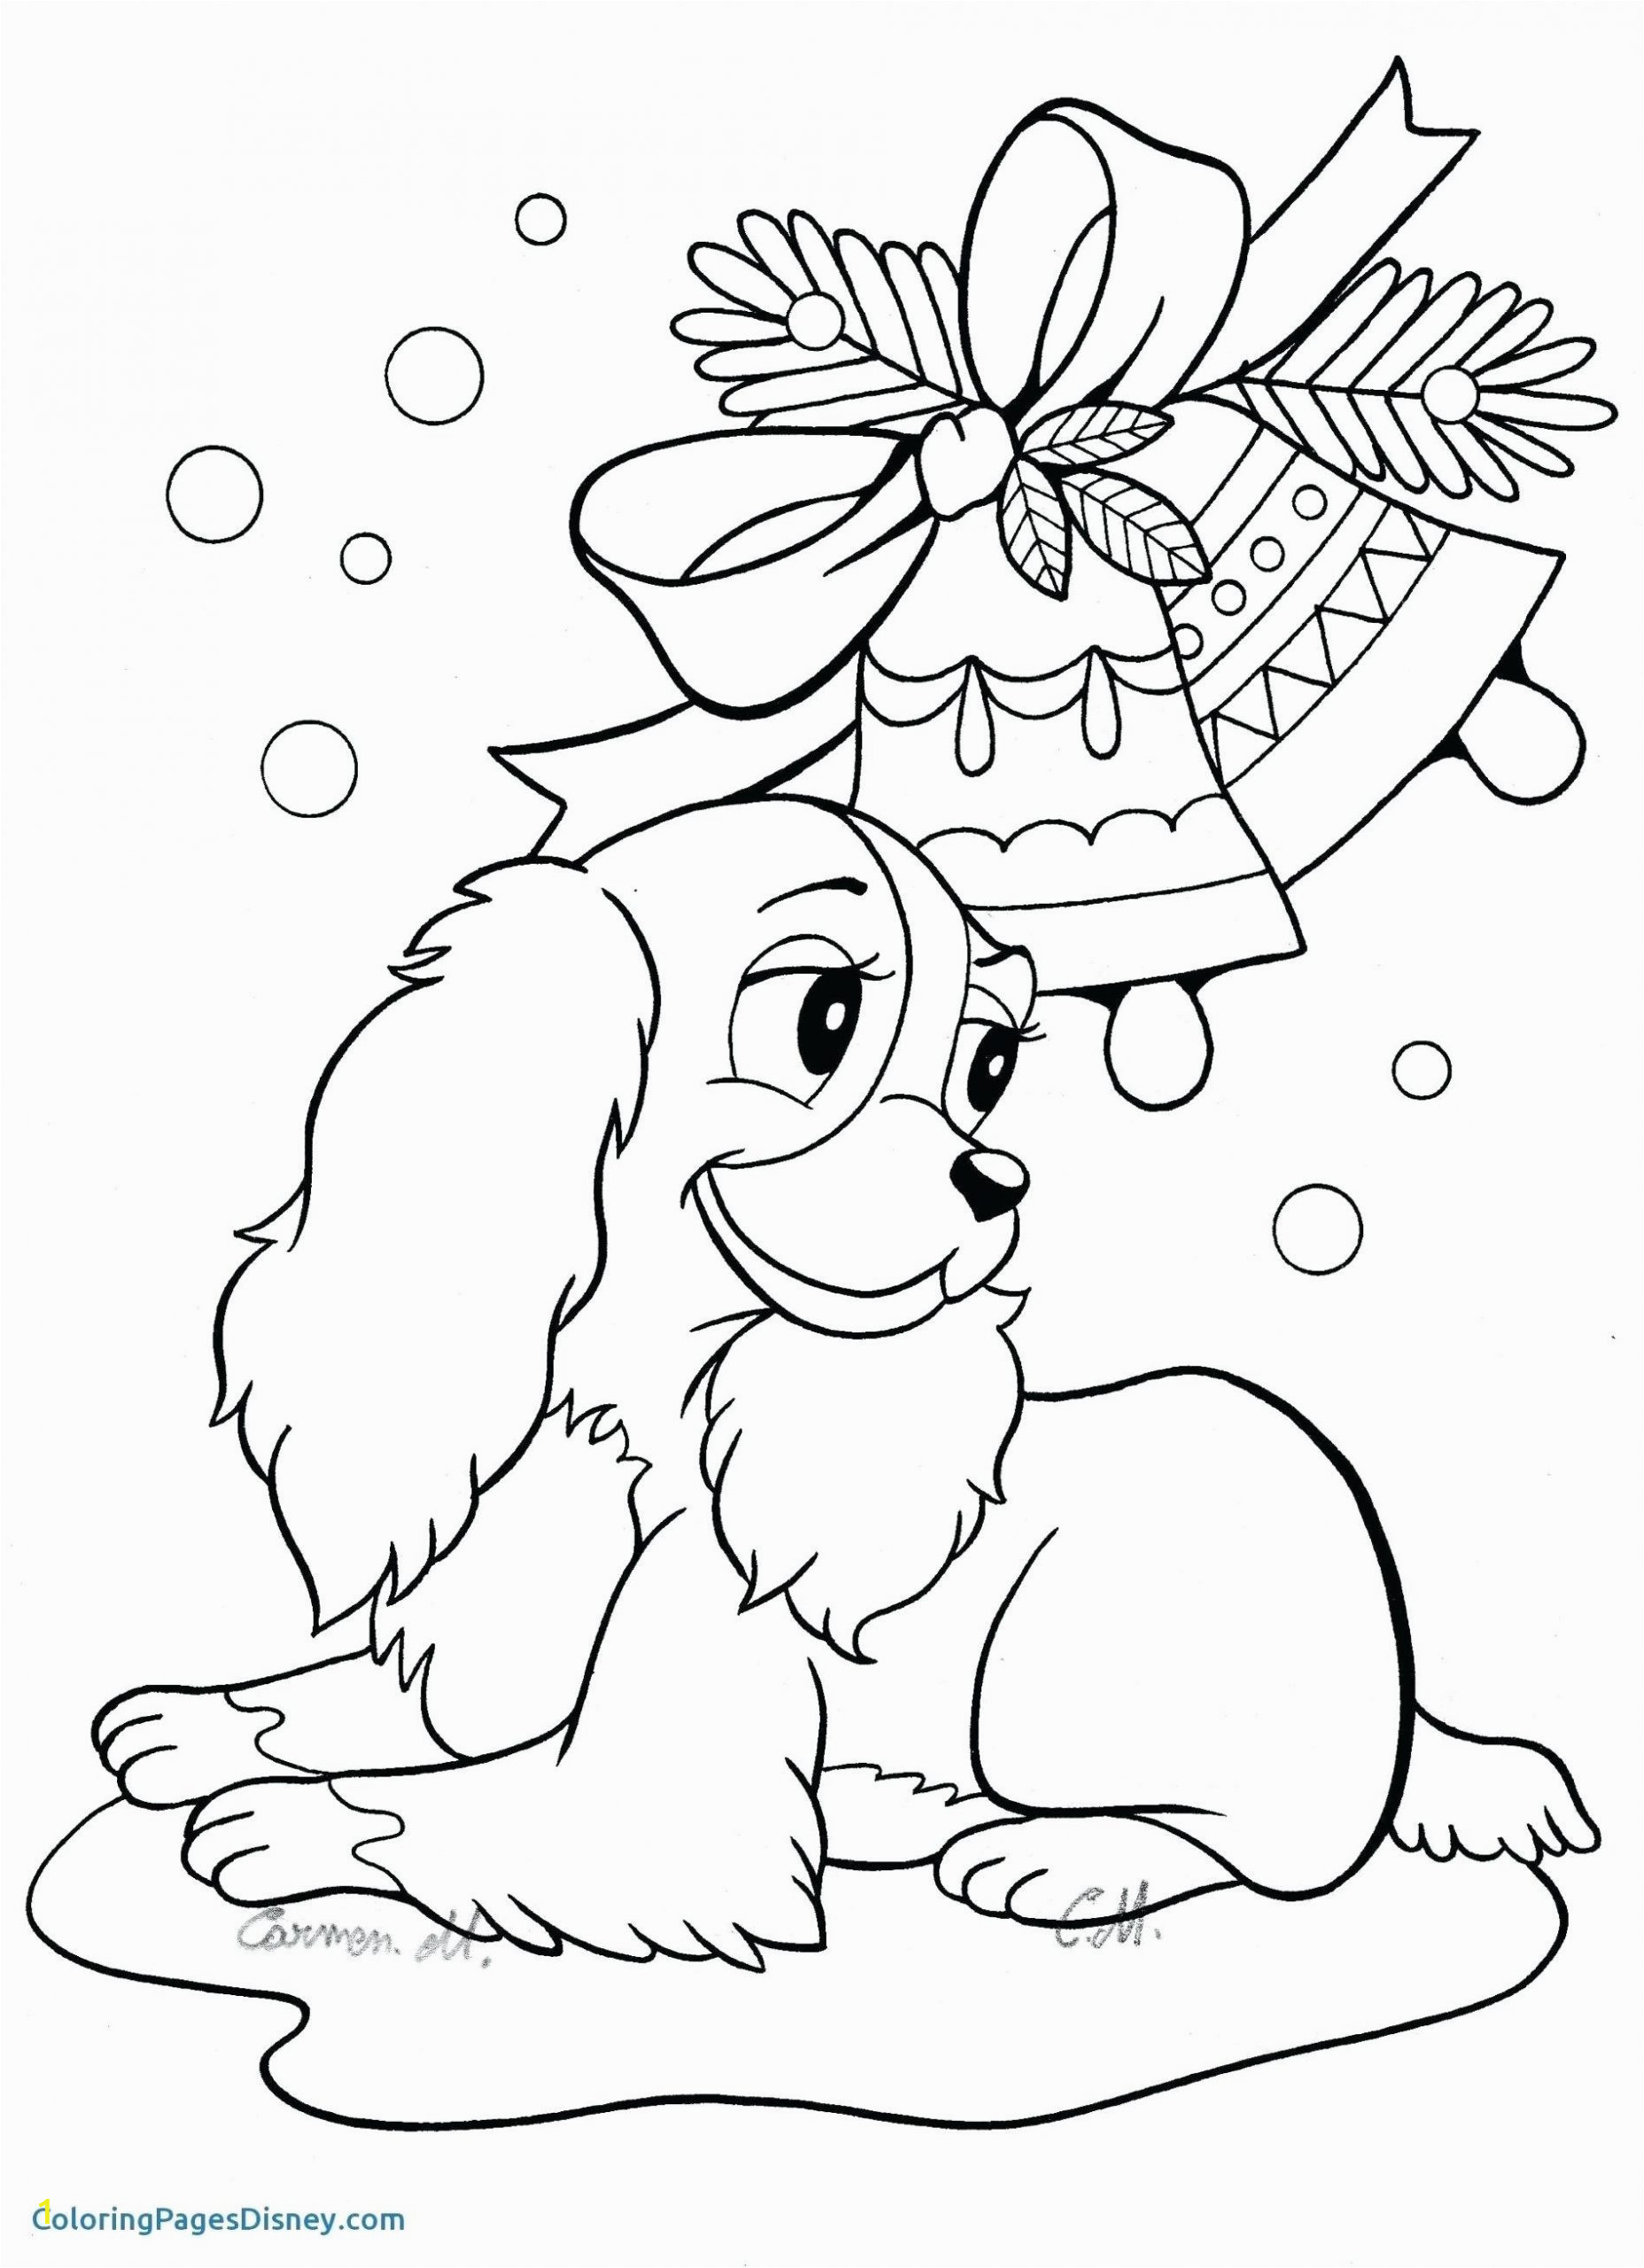 princess coloring pages for kids spring animals clash royale doodle fusion easy mandala nutcracker page zen summer worksheets christmas colouring children horse in